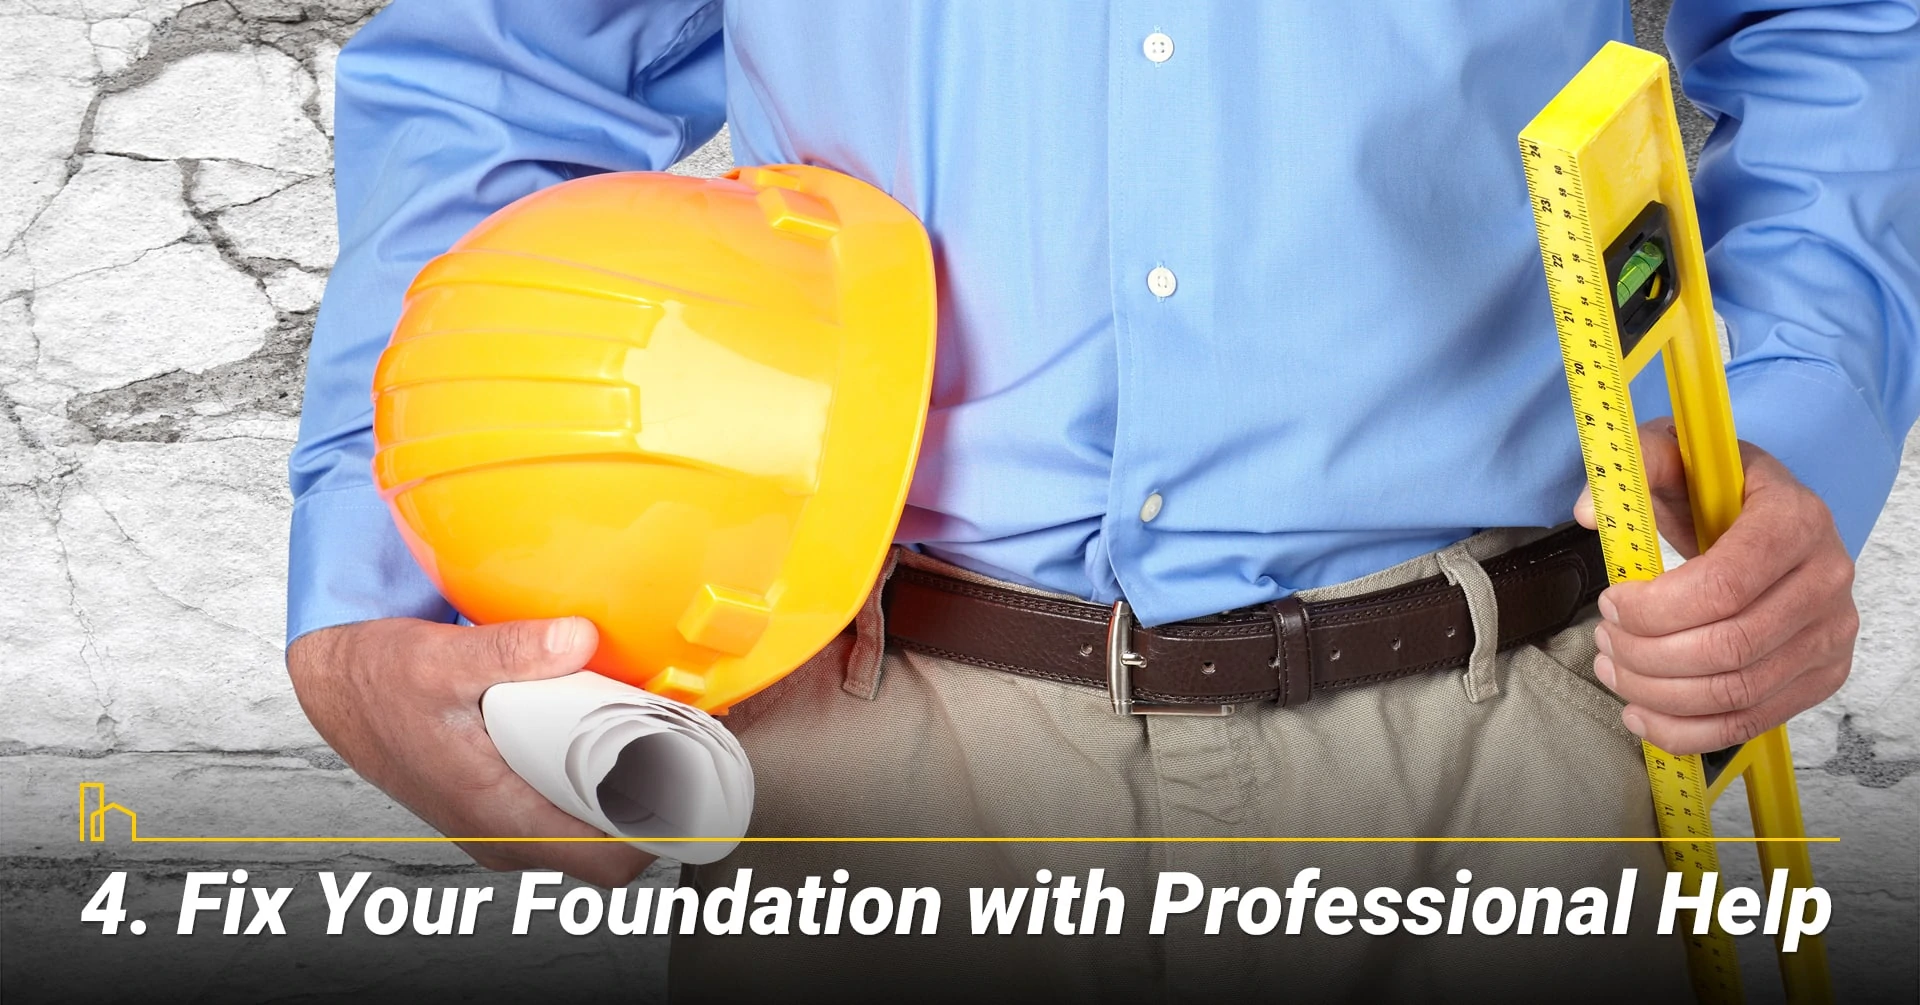 Fix Your Foundation with Professional Help, get the professional to fix it